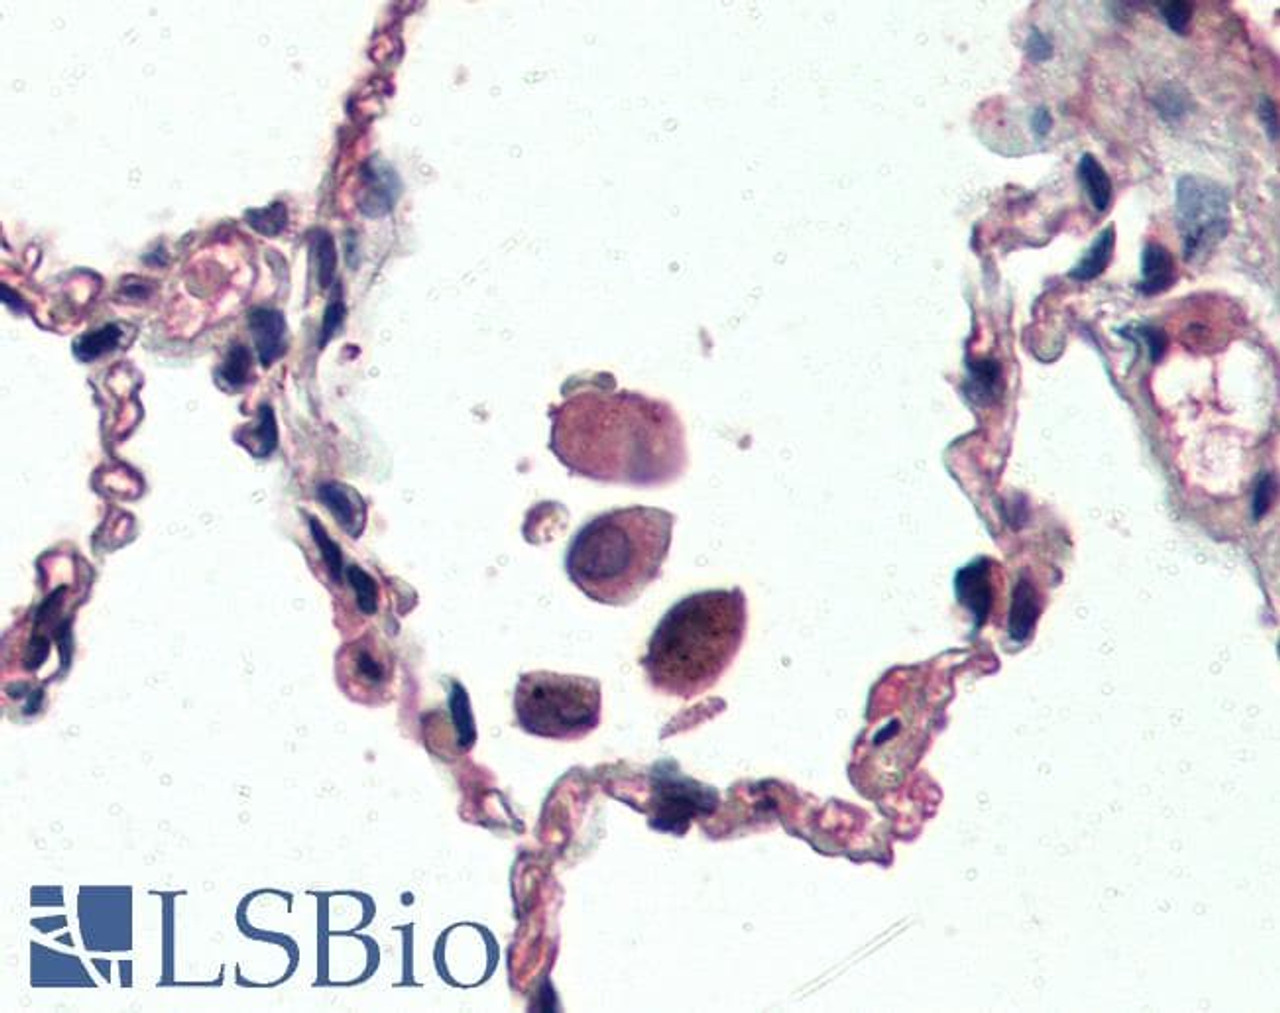 46-549 (3.75ug/ml) staining of paraffin embedded Human Skeletal Muscle. Steamed antigen retrieval with citrate buffer pH 6, AP-staining. <strong>This data is from a previous batch, not on sale.</strong>